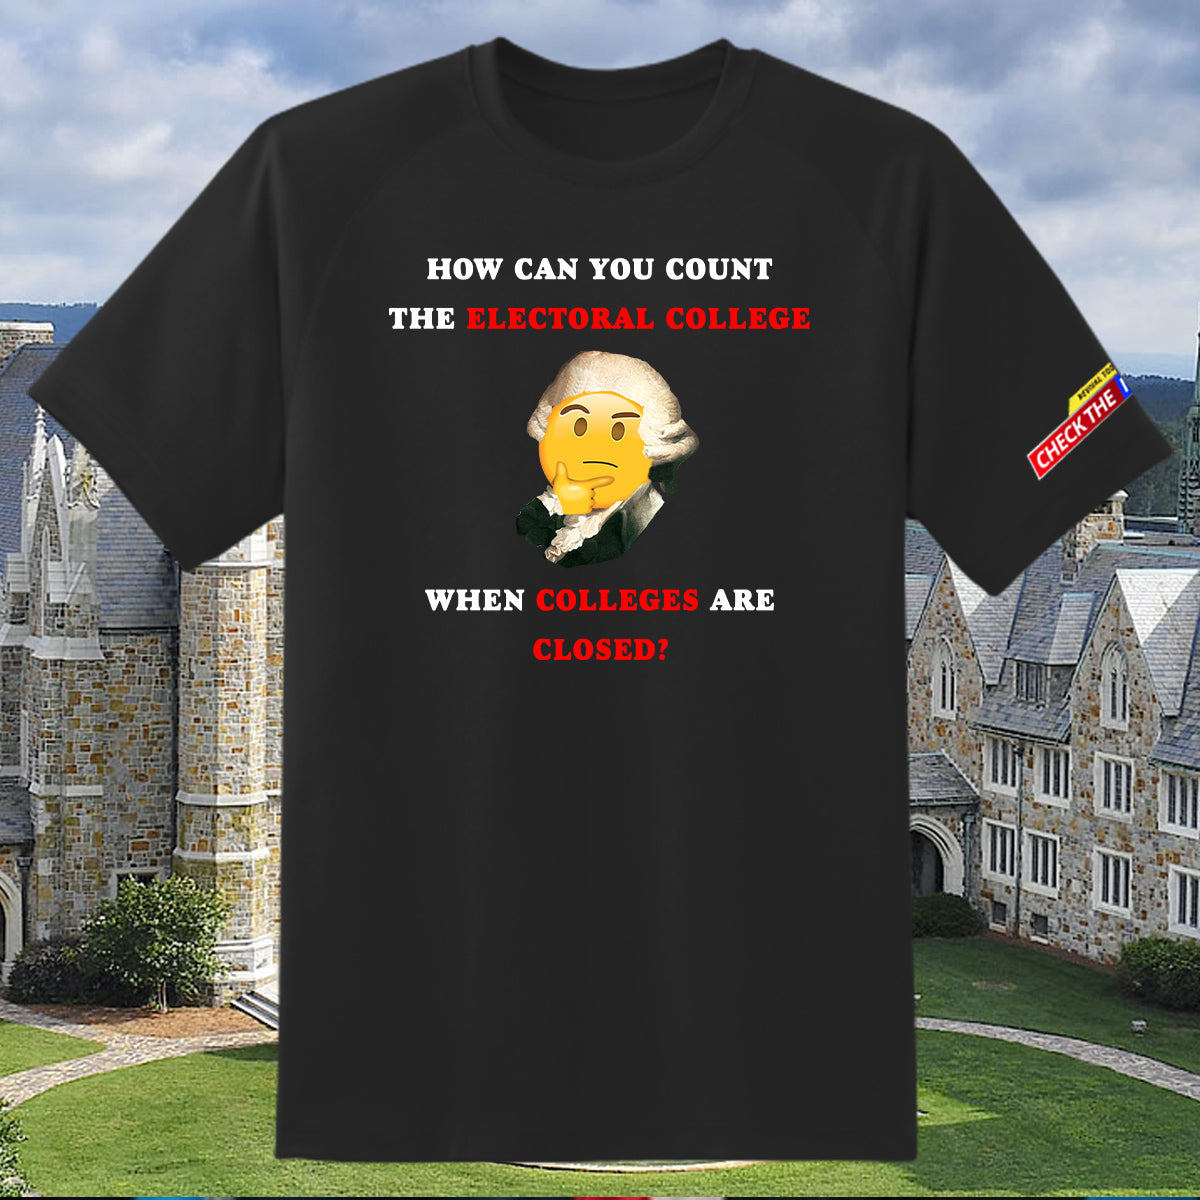 "Electoral College Closed" T-Shirt